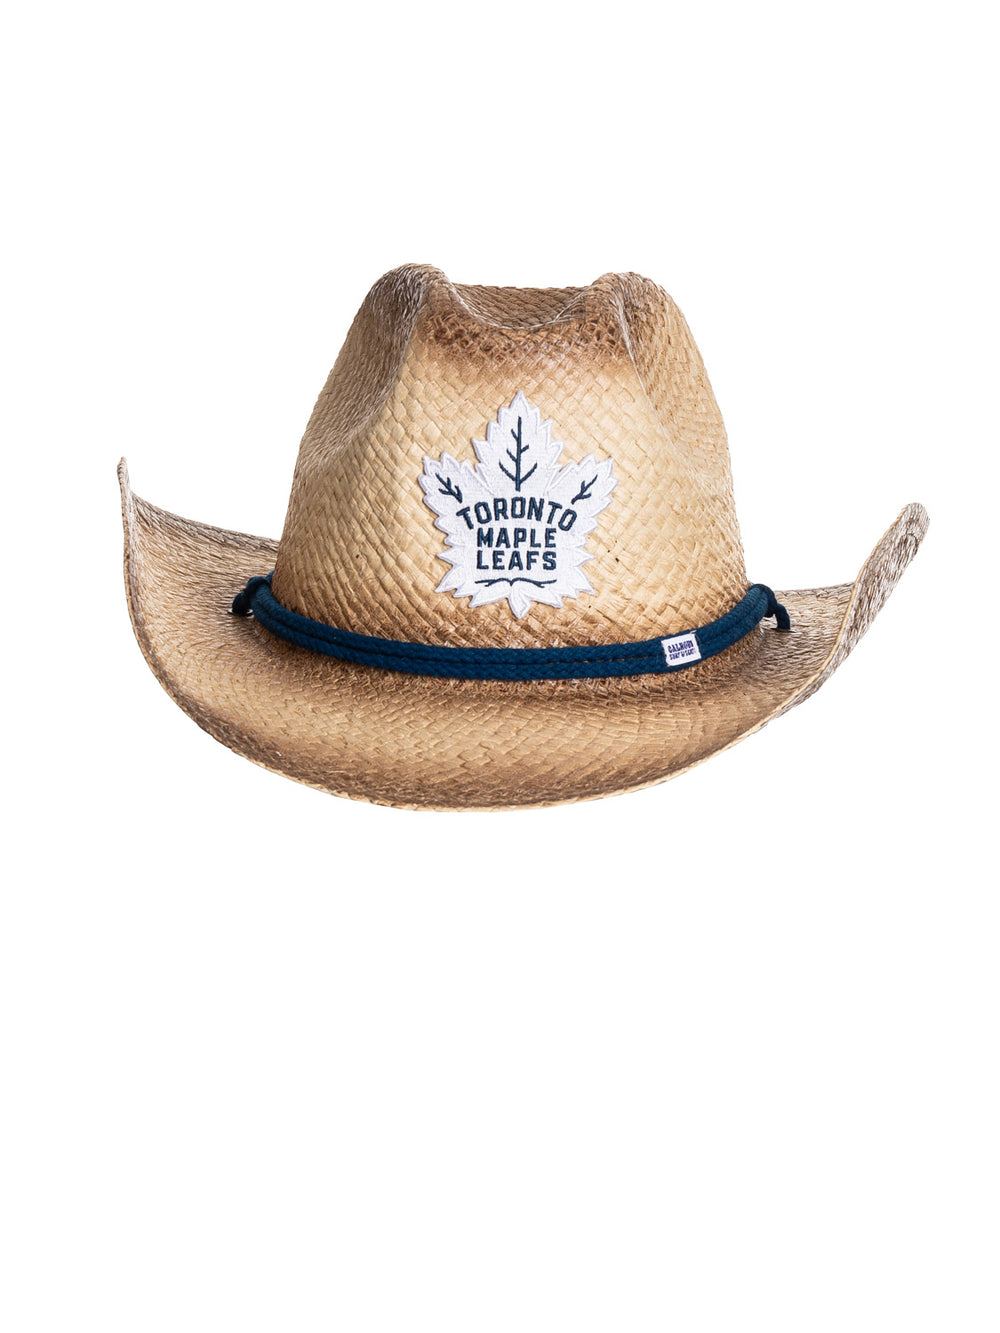 The front of the Toronto Maple Leafs straw cowboy hat. It is a tan straw hat with the Maple Leafs logo in the centre of it, with a navy blue rope running along the crown of the hat.